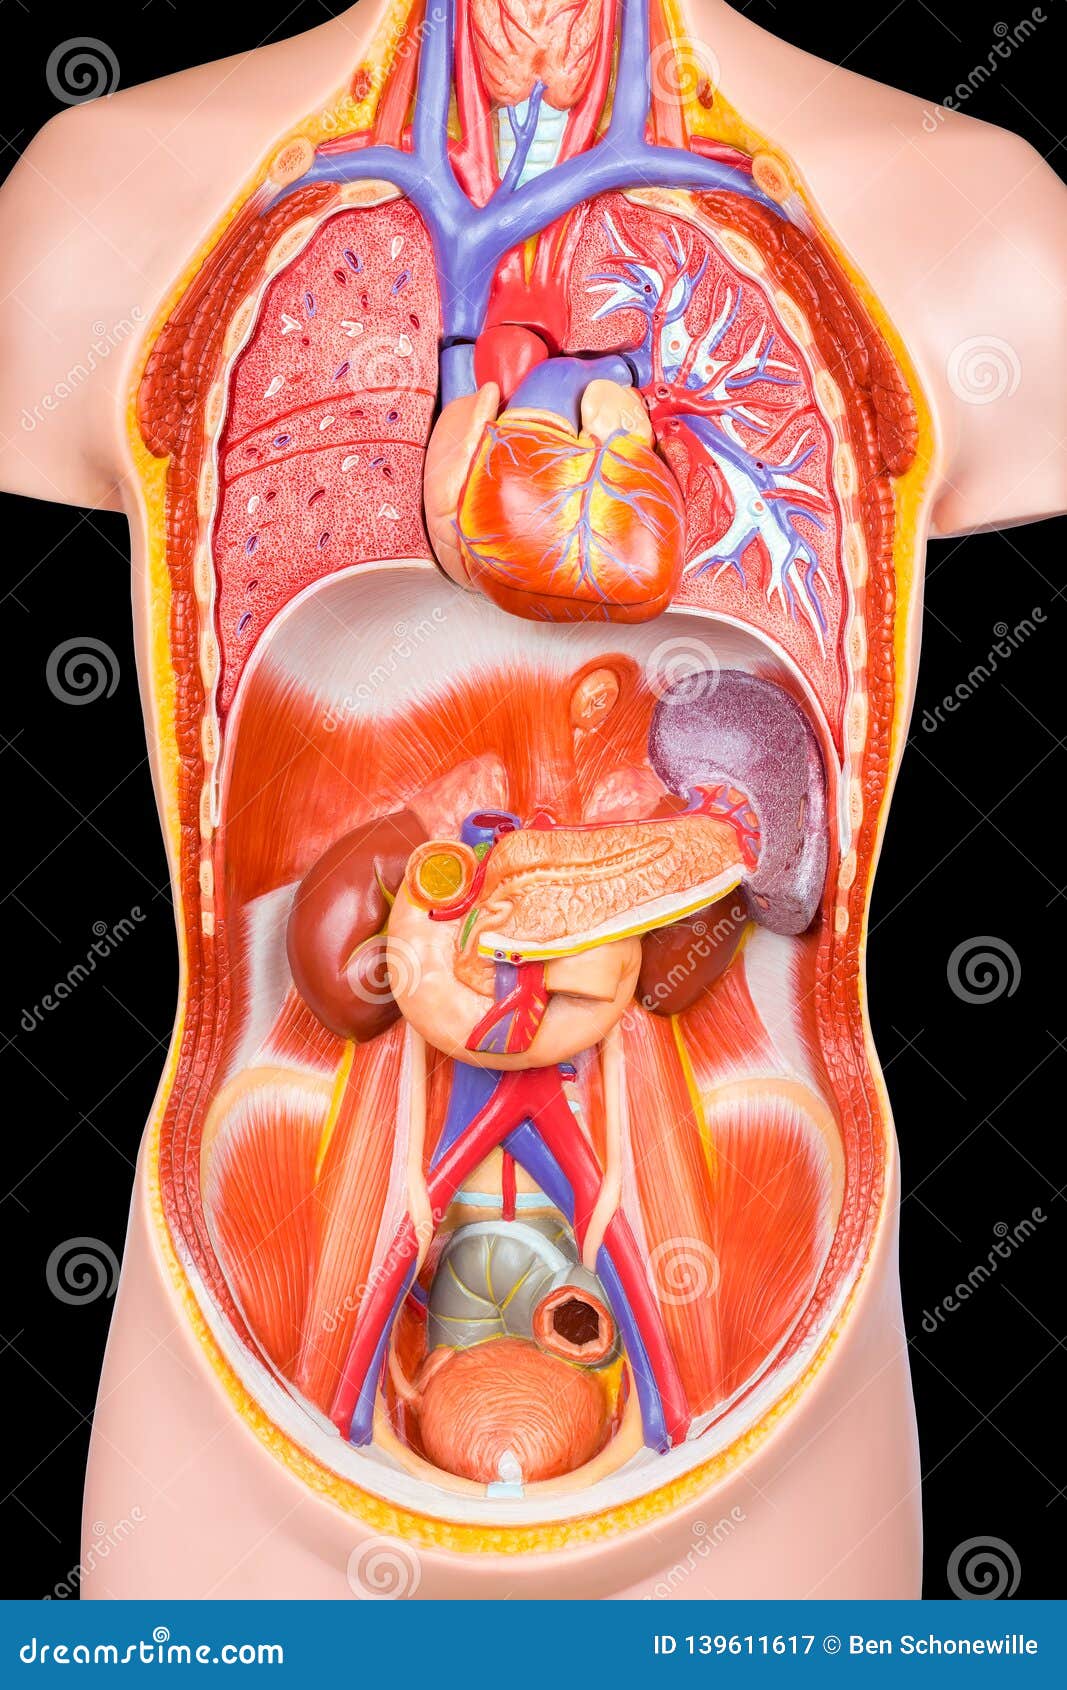 Human Torso Model With Internal Organs On Black Background Stock Image - Image of education ...